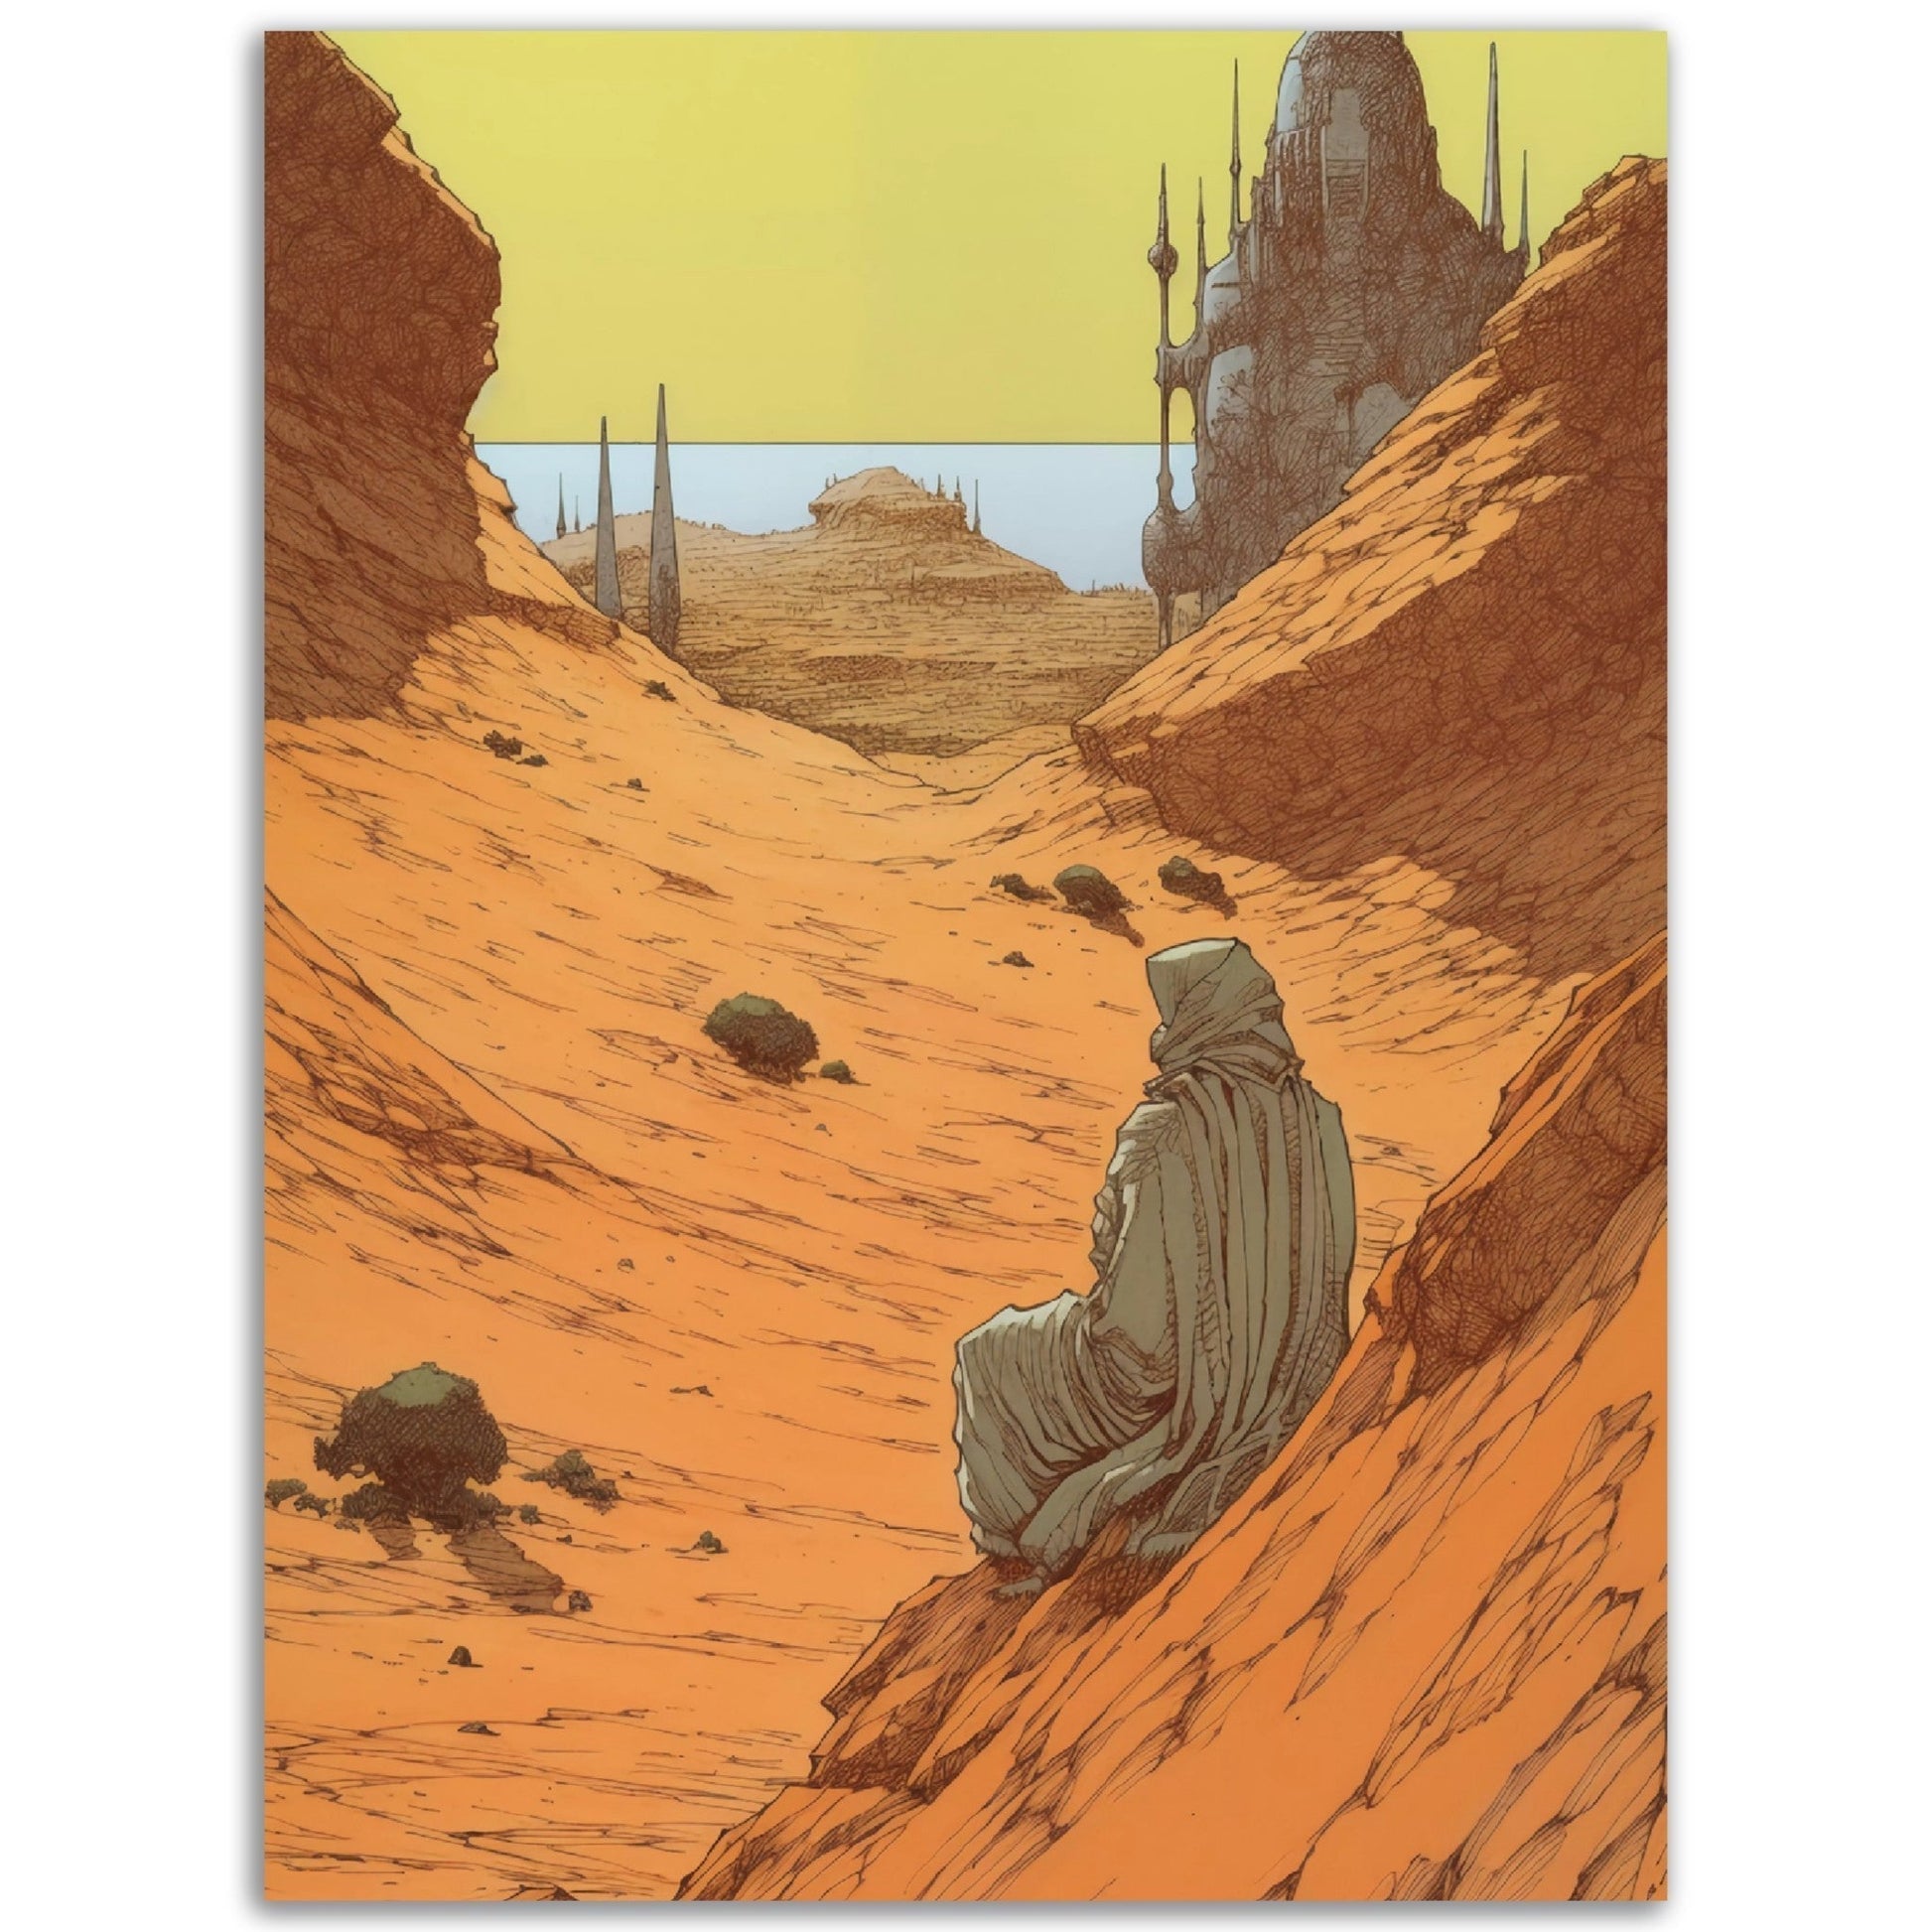 A high-quality illustration of "The Young Traveller At Rest", perfect for poster wall art in any room.